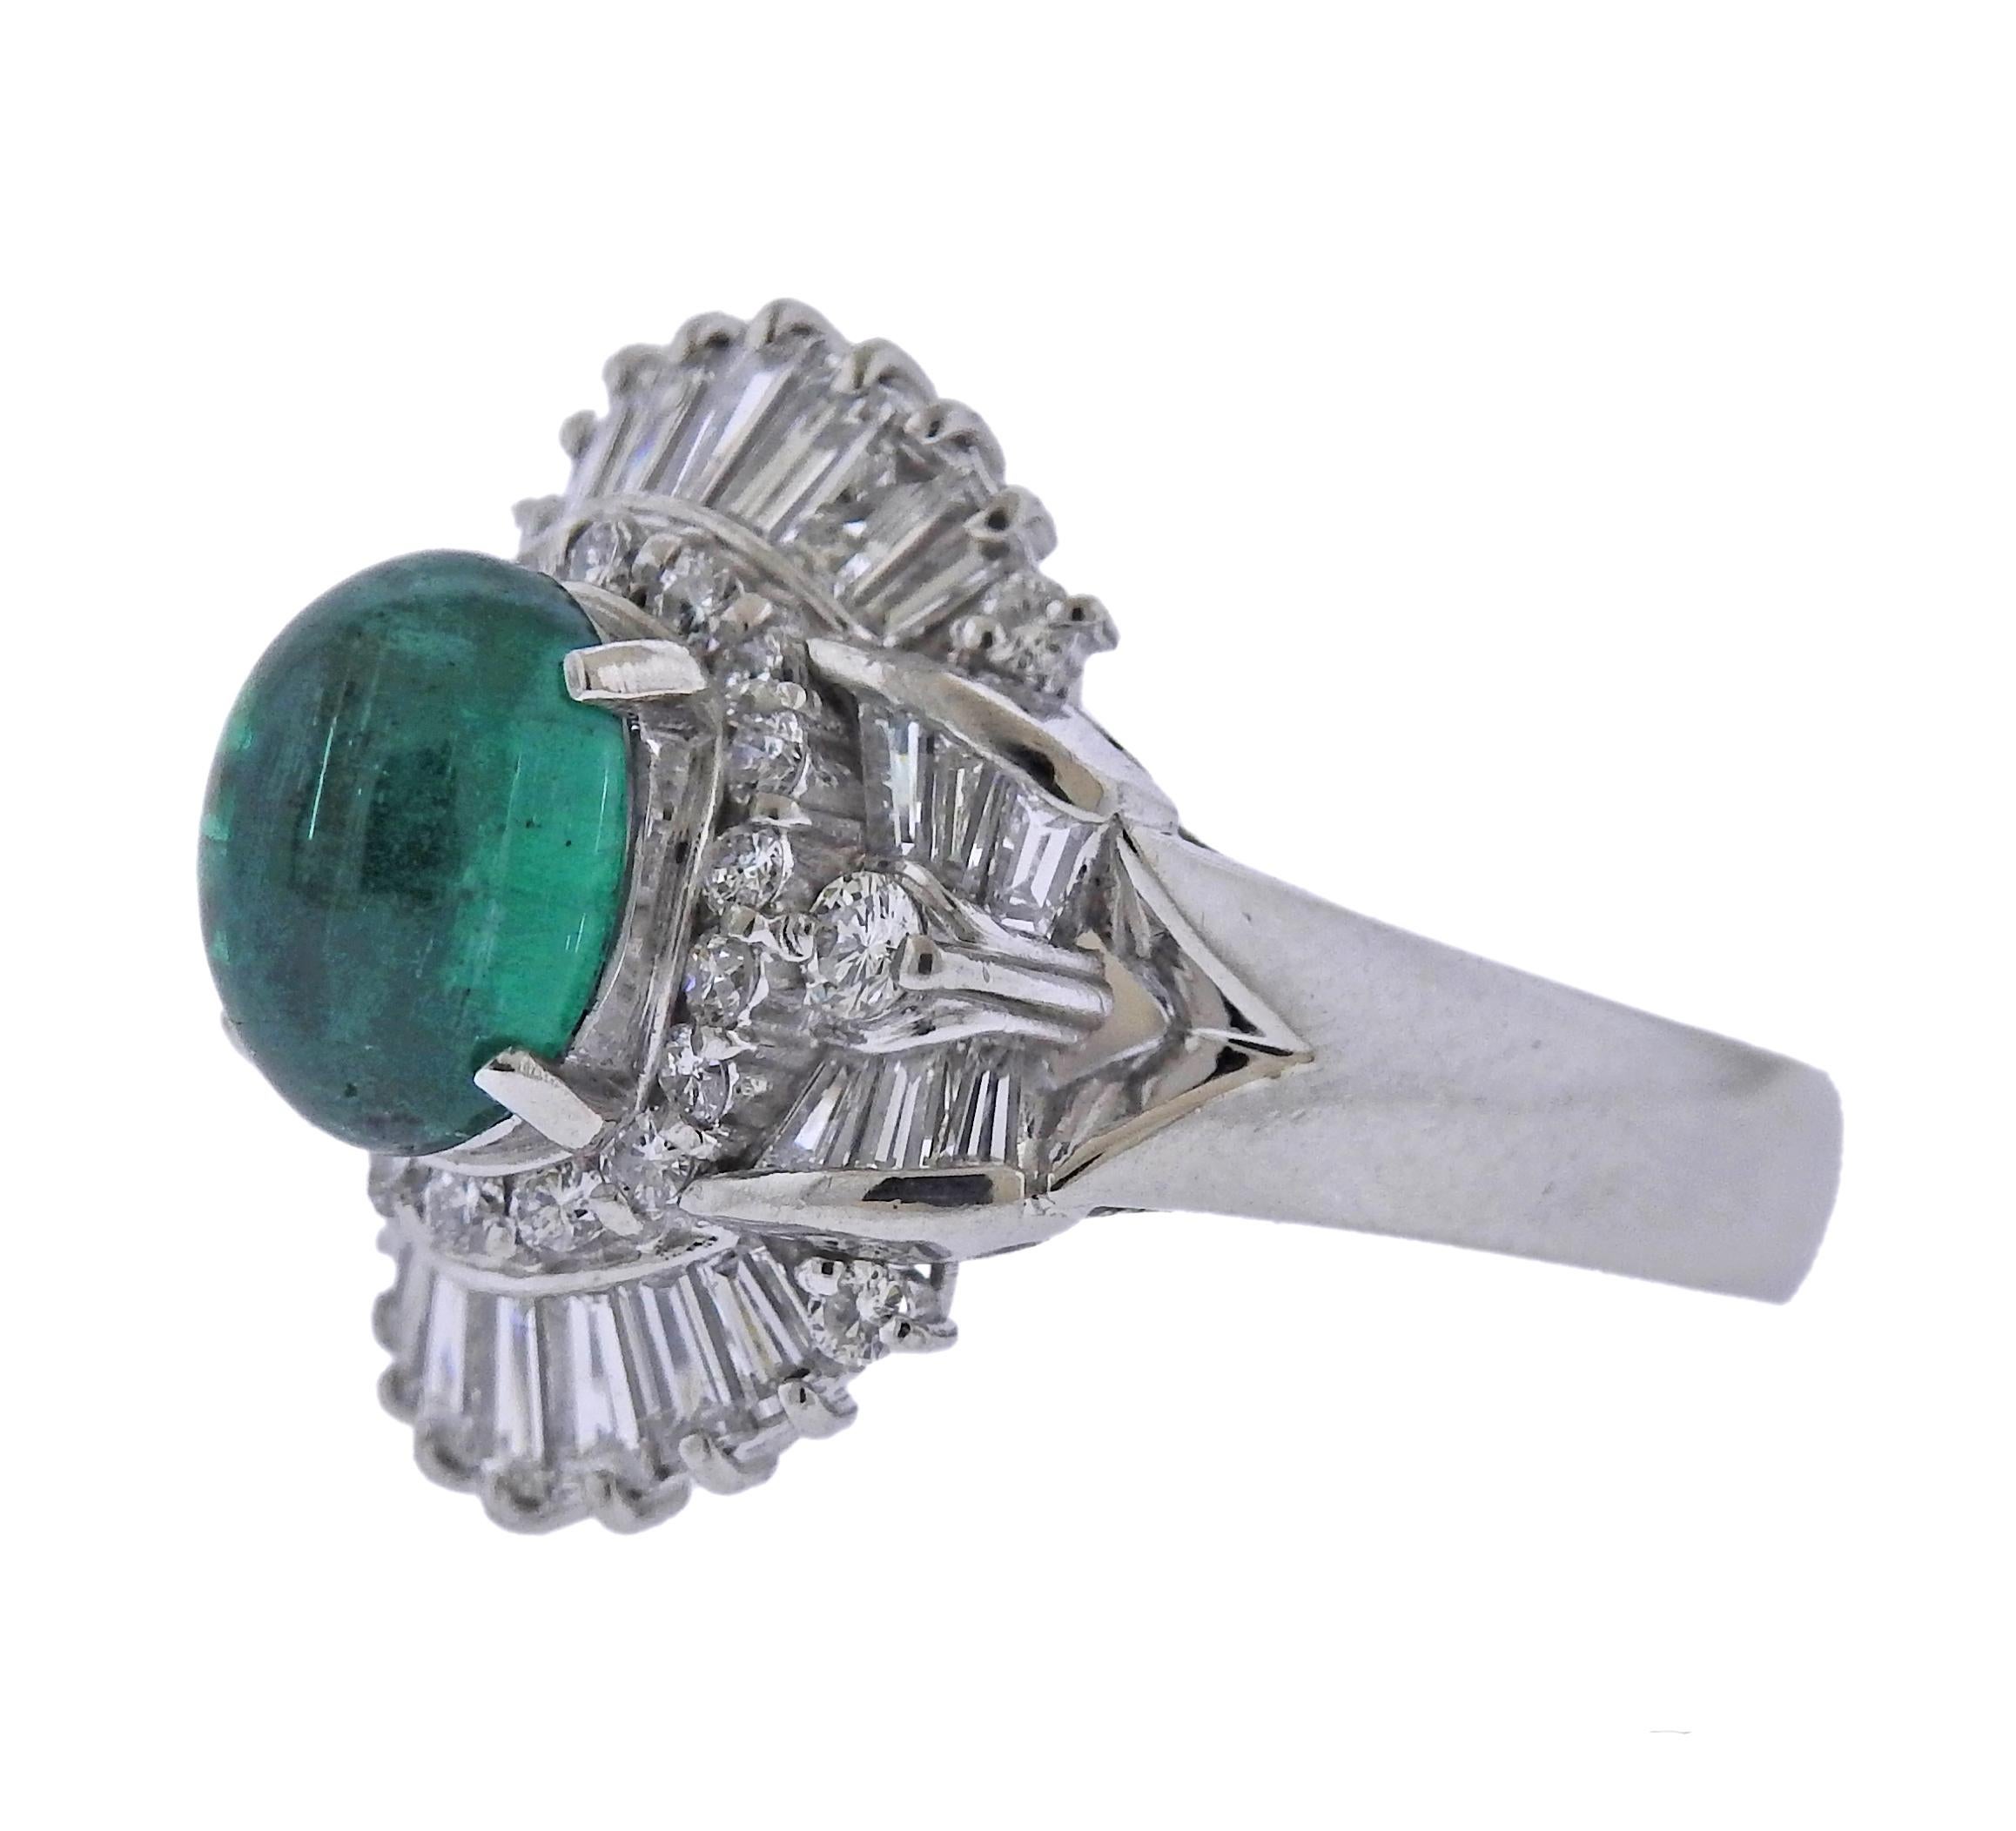 Platinum cocktail ring, with center 2.47ct emerald cabochon, and 1.45ctw in diamonds. Ring size - 6, ring top is 18mm x 20mm. Marked: 2.47, Pt900, D1454. Weight - 12.4 grams.